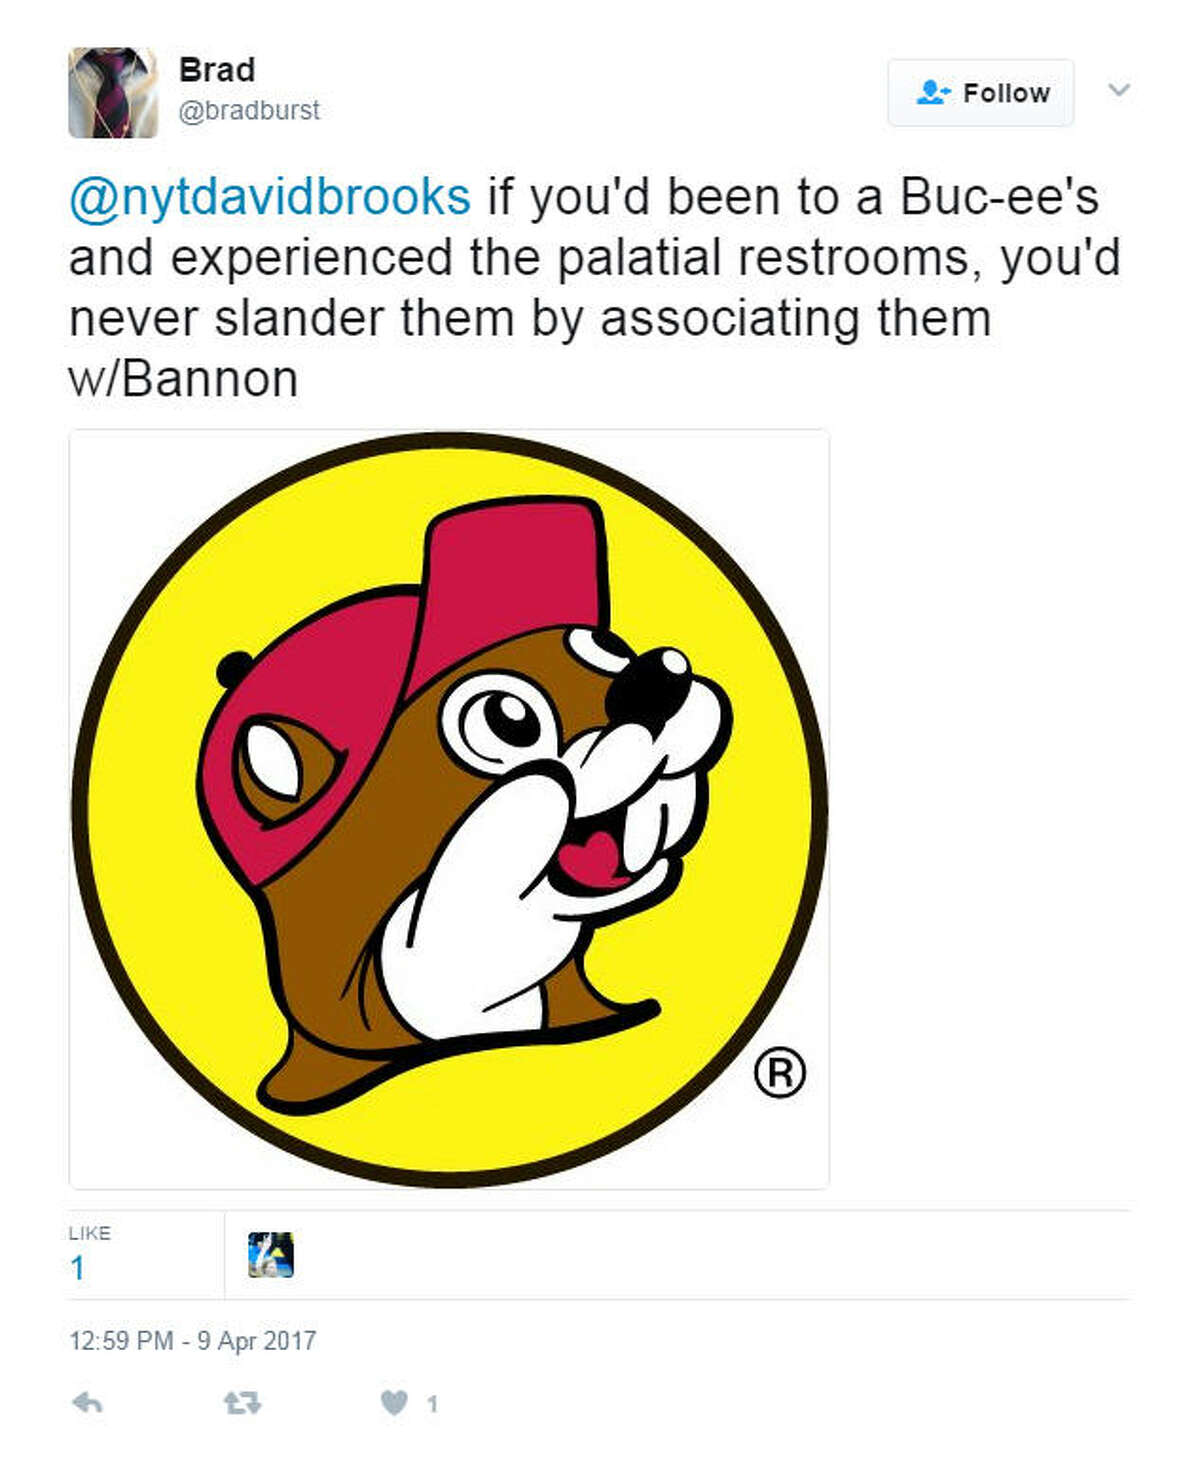 "@nytdavidbrooks if you'd been to a Buc-ee's and experienced the palatial restrooms, you'd never slander them by associating them w/Bannon" Source: Twitter